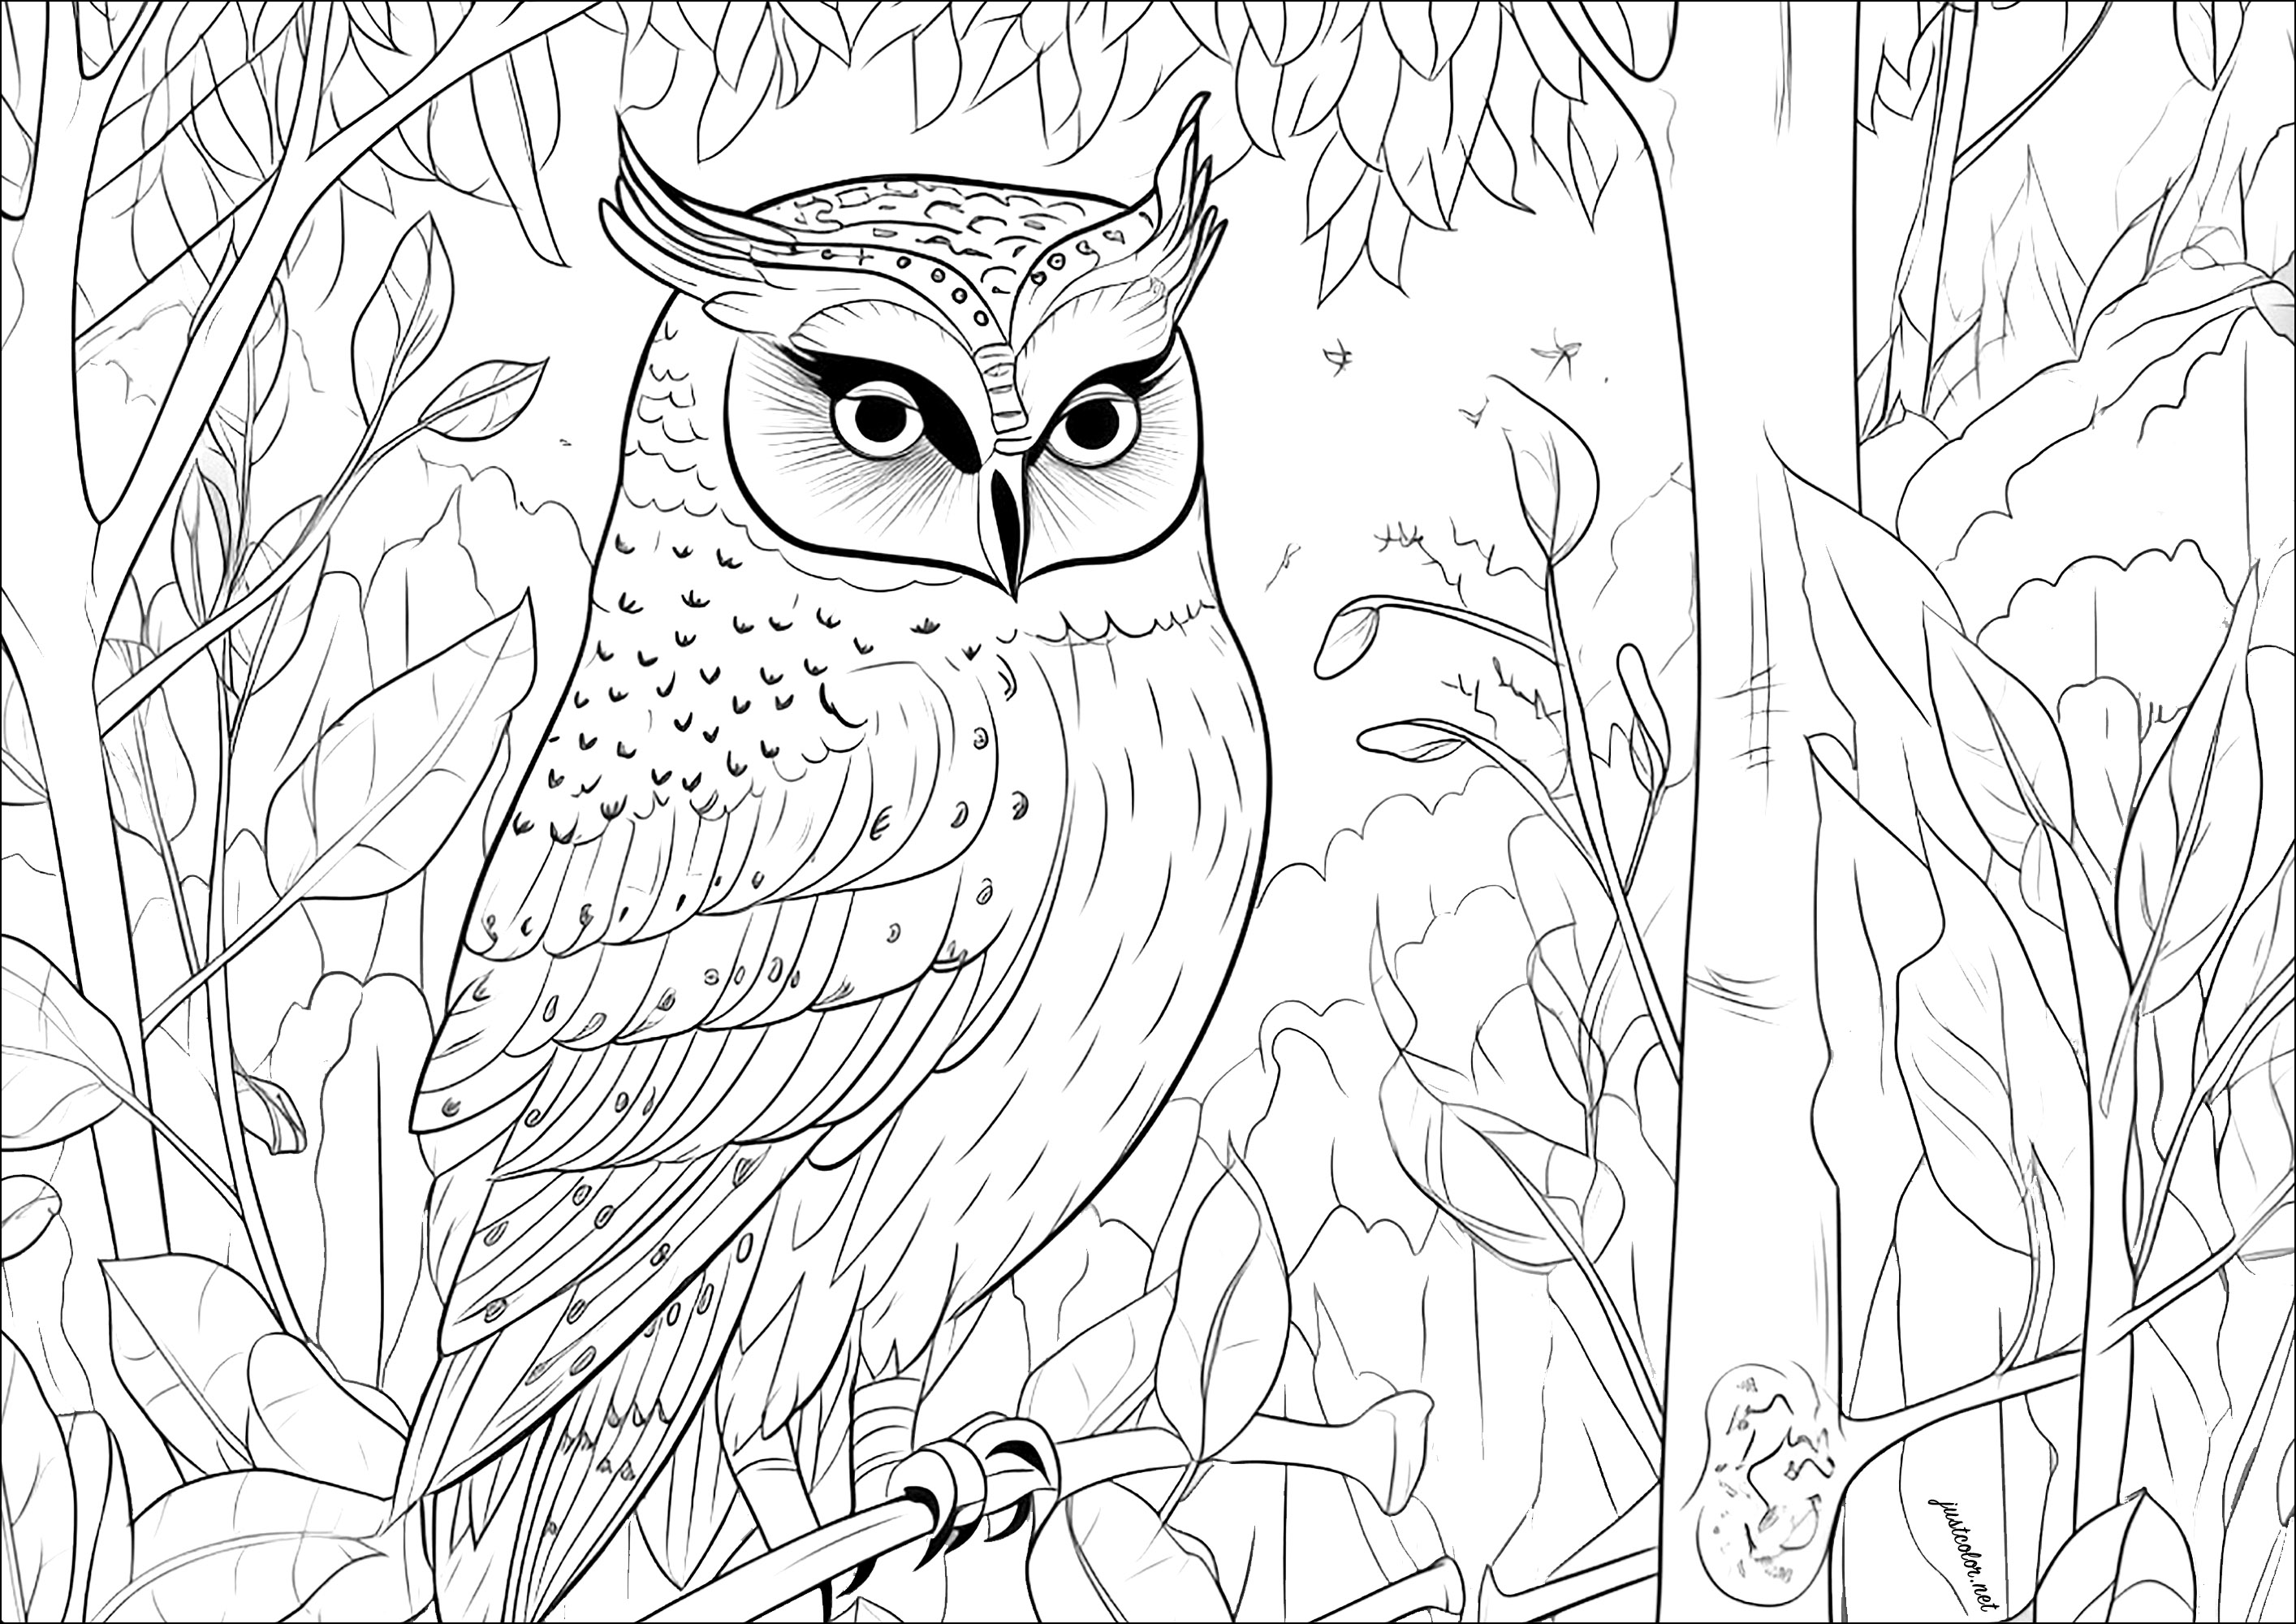 Pretty owl in the forest. A beautiful coloring page depicting an owl perched on a branch in the middle of a forest.Lots of details to color, both in the main subject and in the plant background.